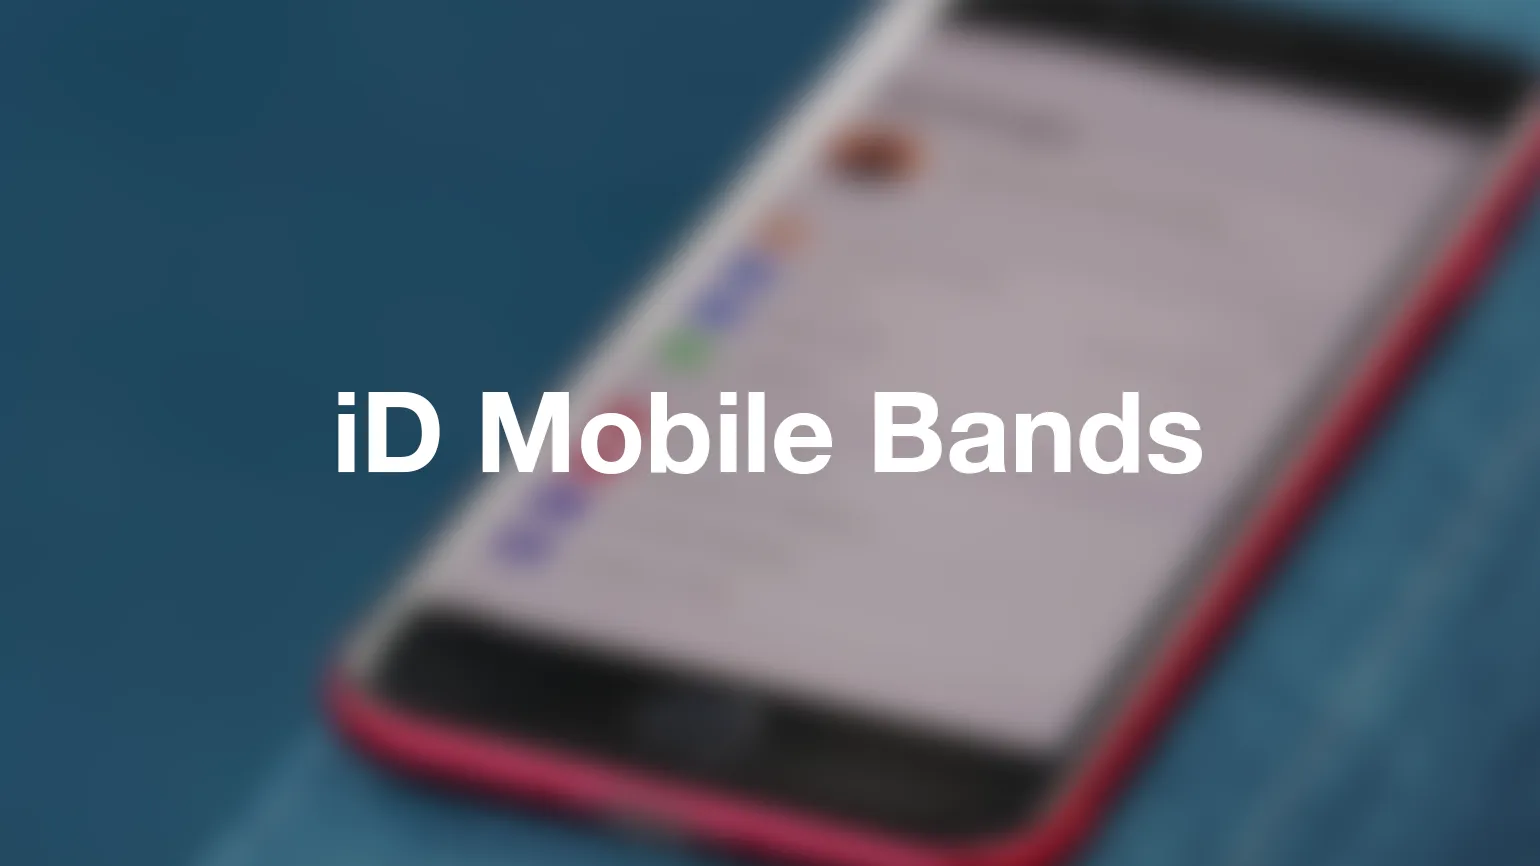 iD Mobile Bands